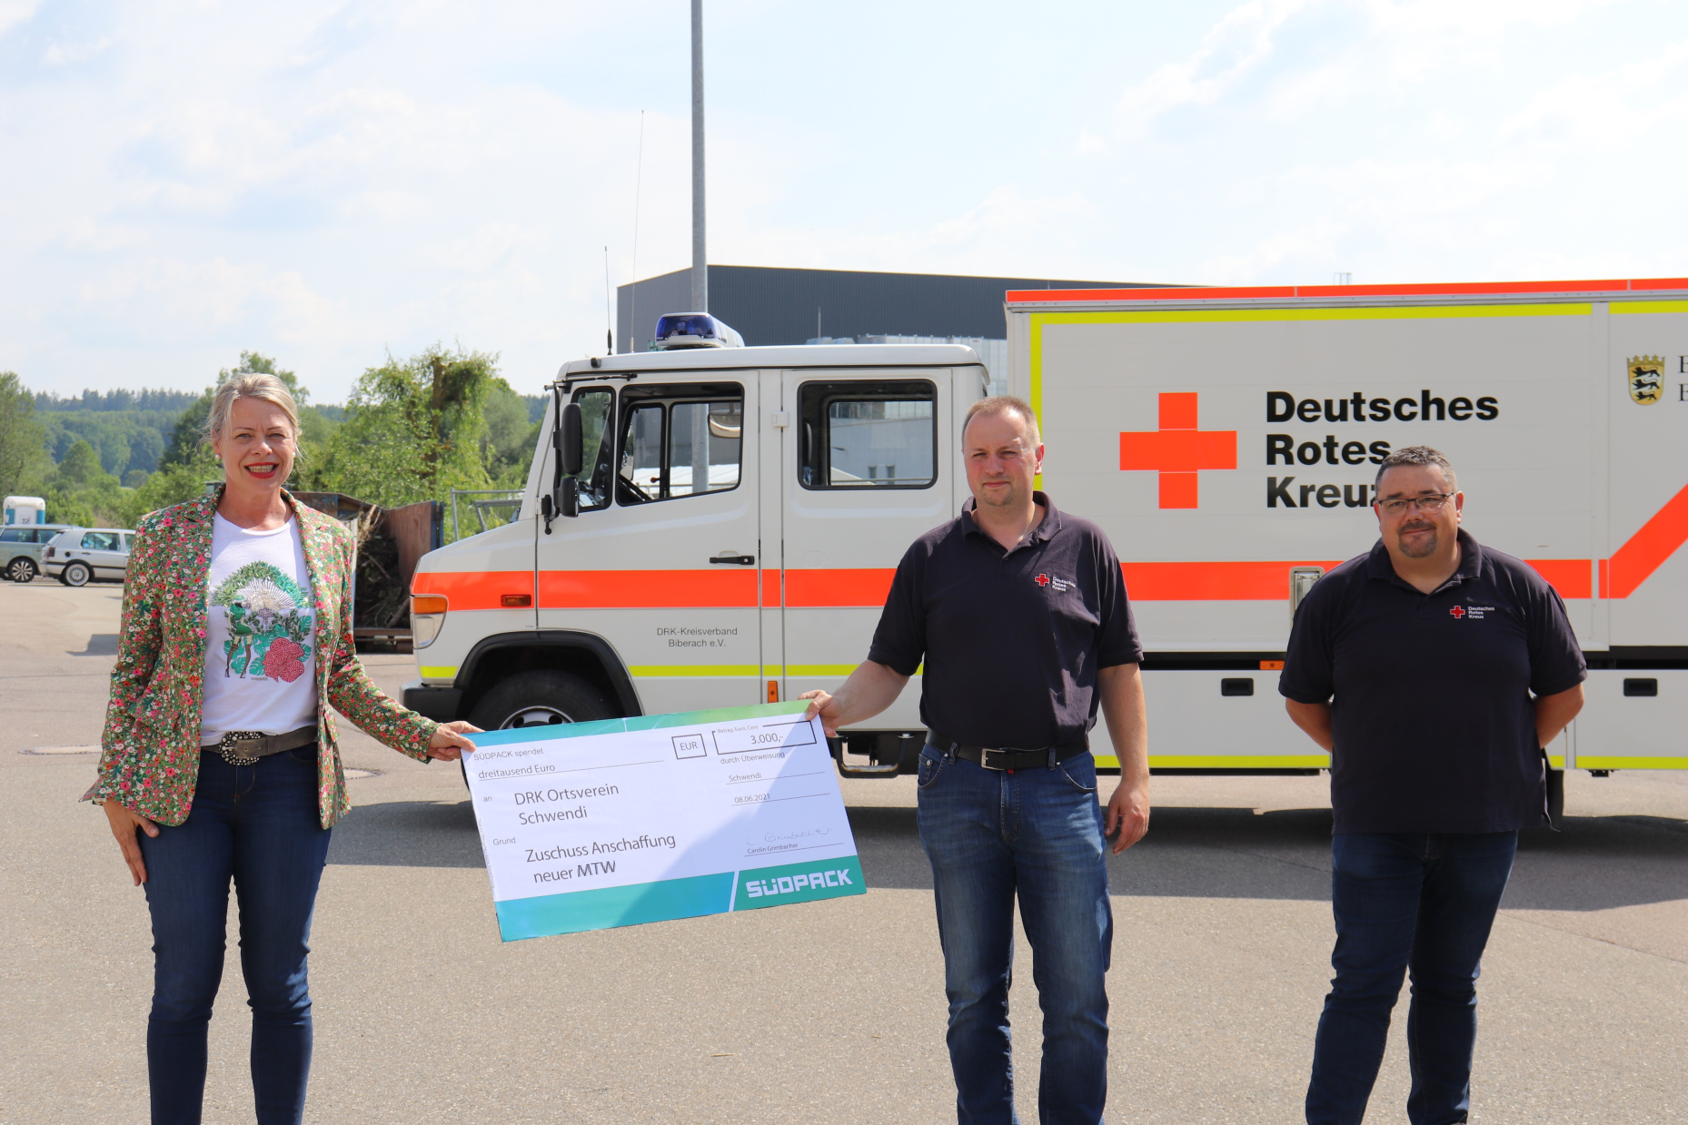 "Carolin Grimbacher from SÜDPACK presents a check of 3,000 euros for the acquisition of a new ambulance to the DRK Local Chapter Schwendi, in the presence of local press, on Tuesday, June 8, 2021, at the Schwendi facility.